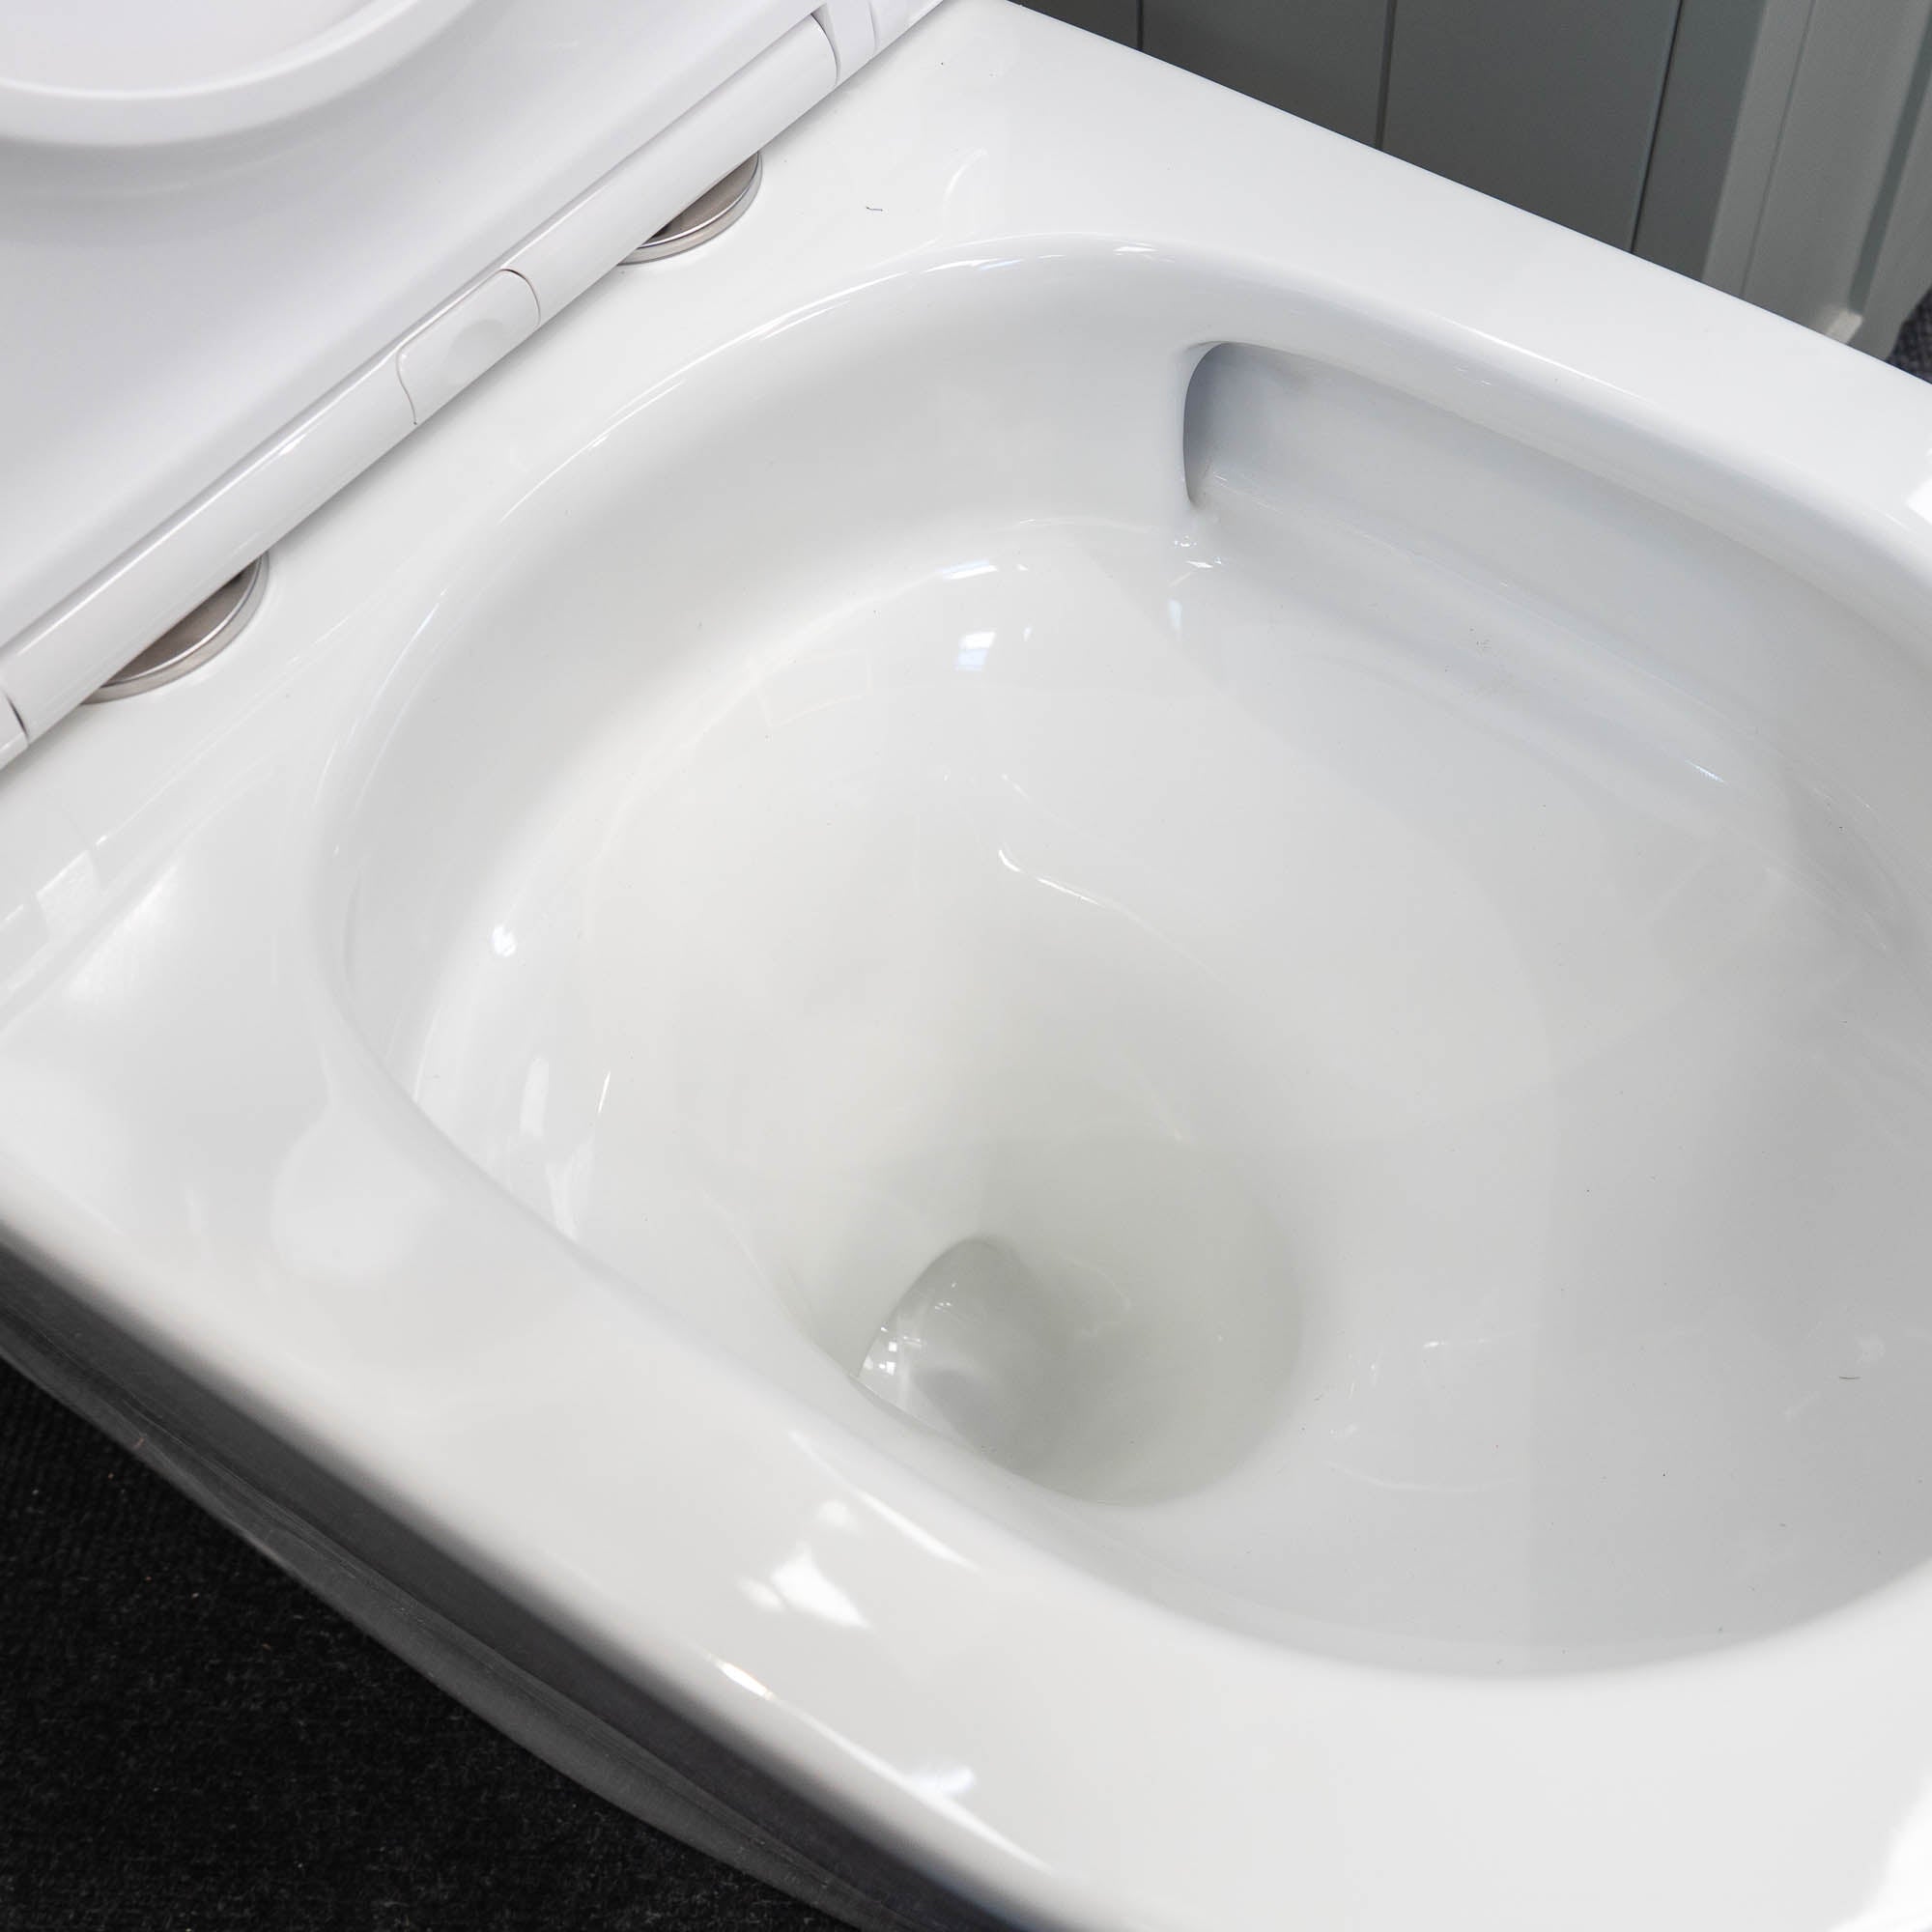 Granlusso Sorrento Rimless WC with Geberit Tornado Flush System and Soft Close Quick Release Seat